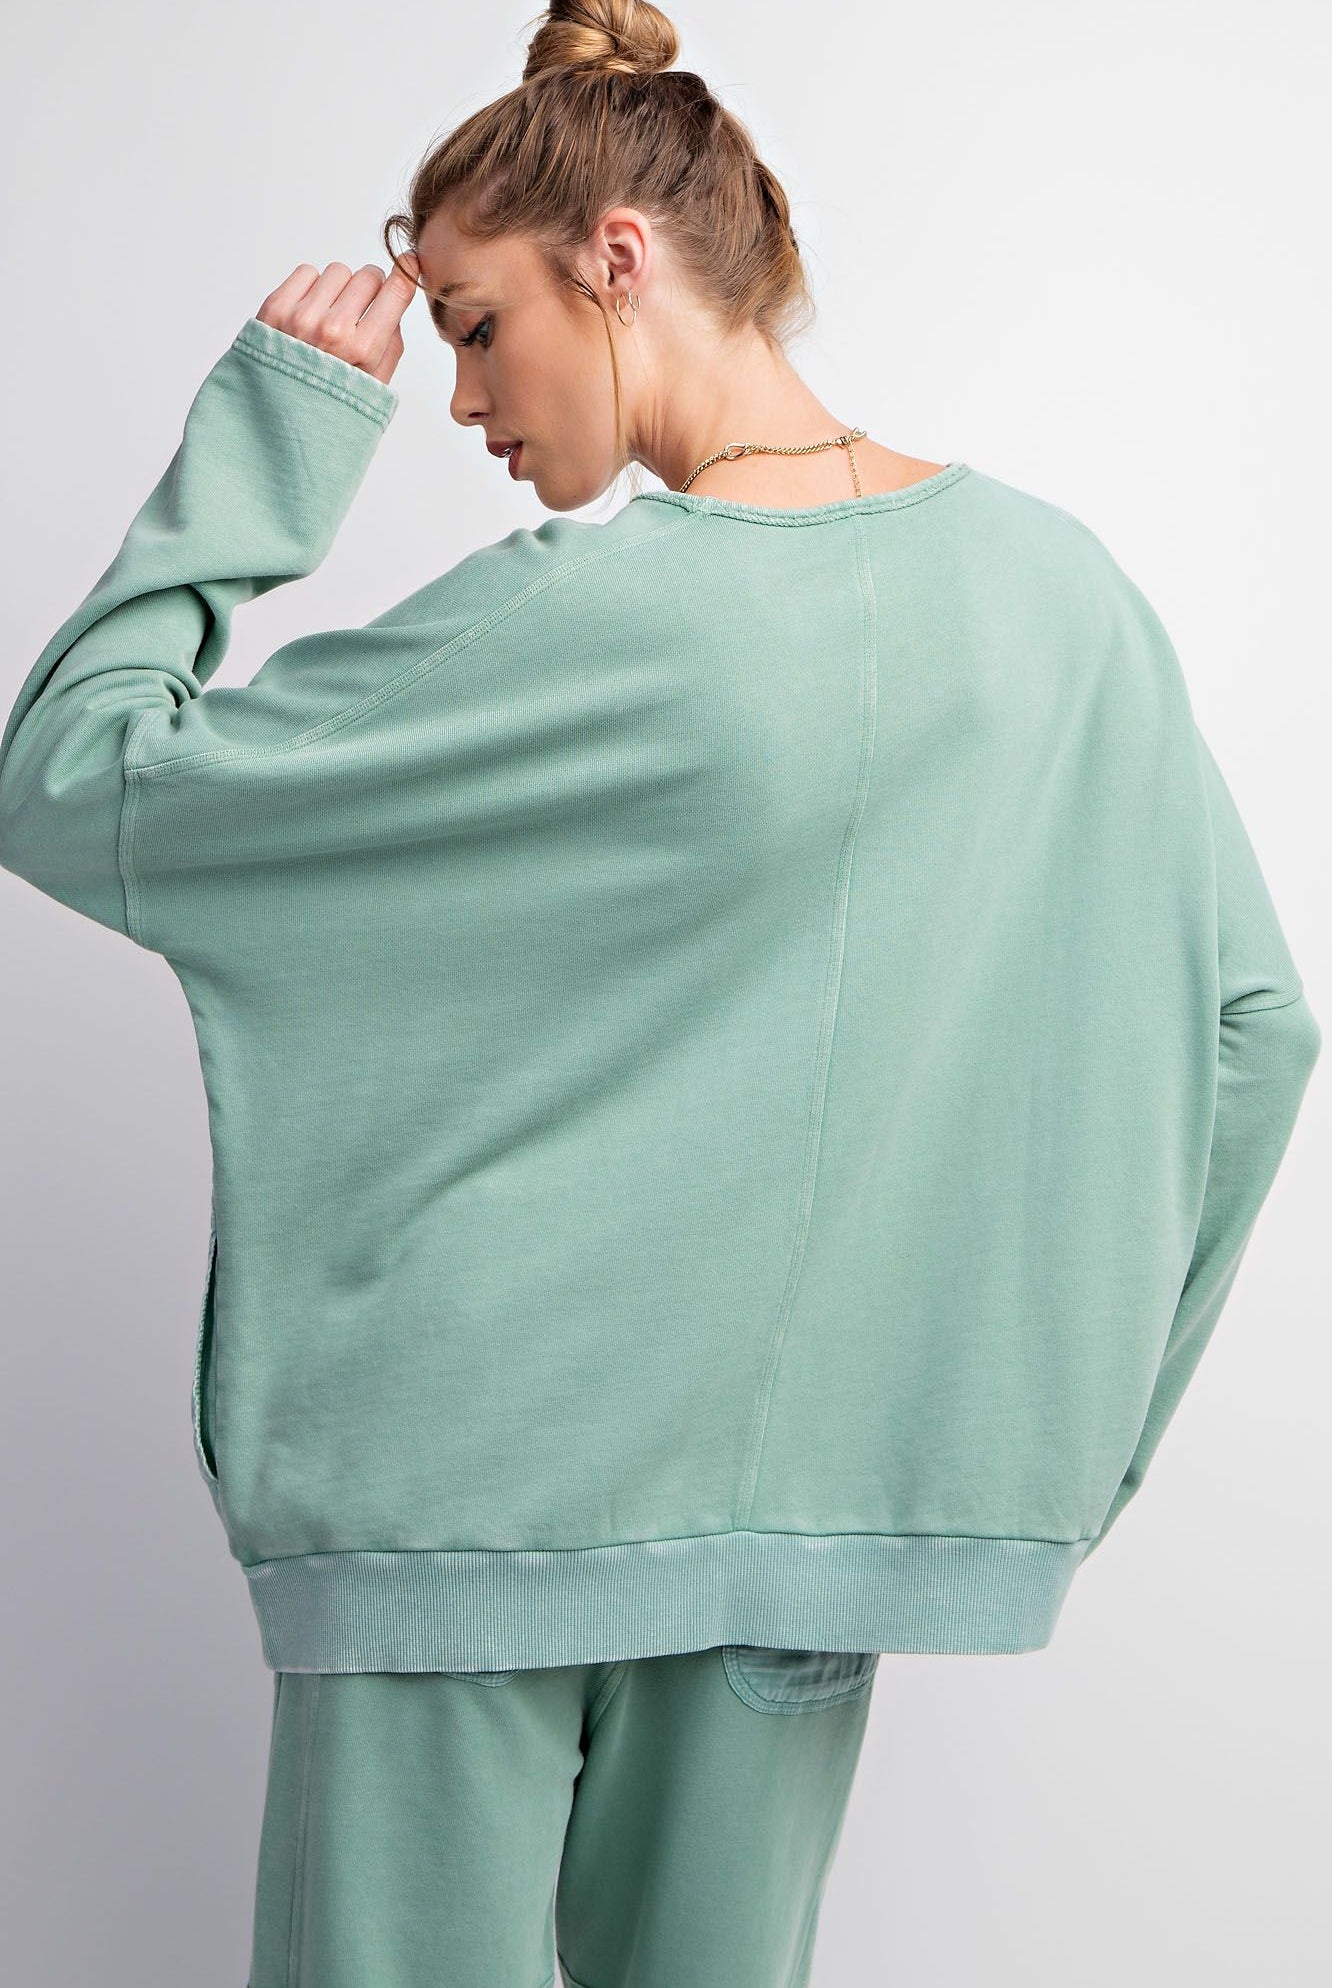 Teal Green Mineral Wash French Terry Top | Stuffology Boutique-Long Sleeves-Easel-Stuffology - Where Vintage Meets Modern, A Boutique for Real Women in Crosbyton, TX